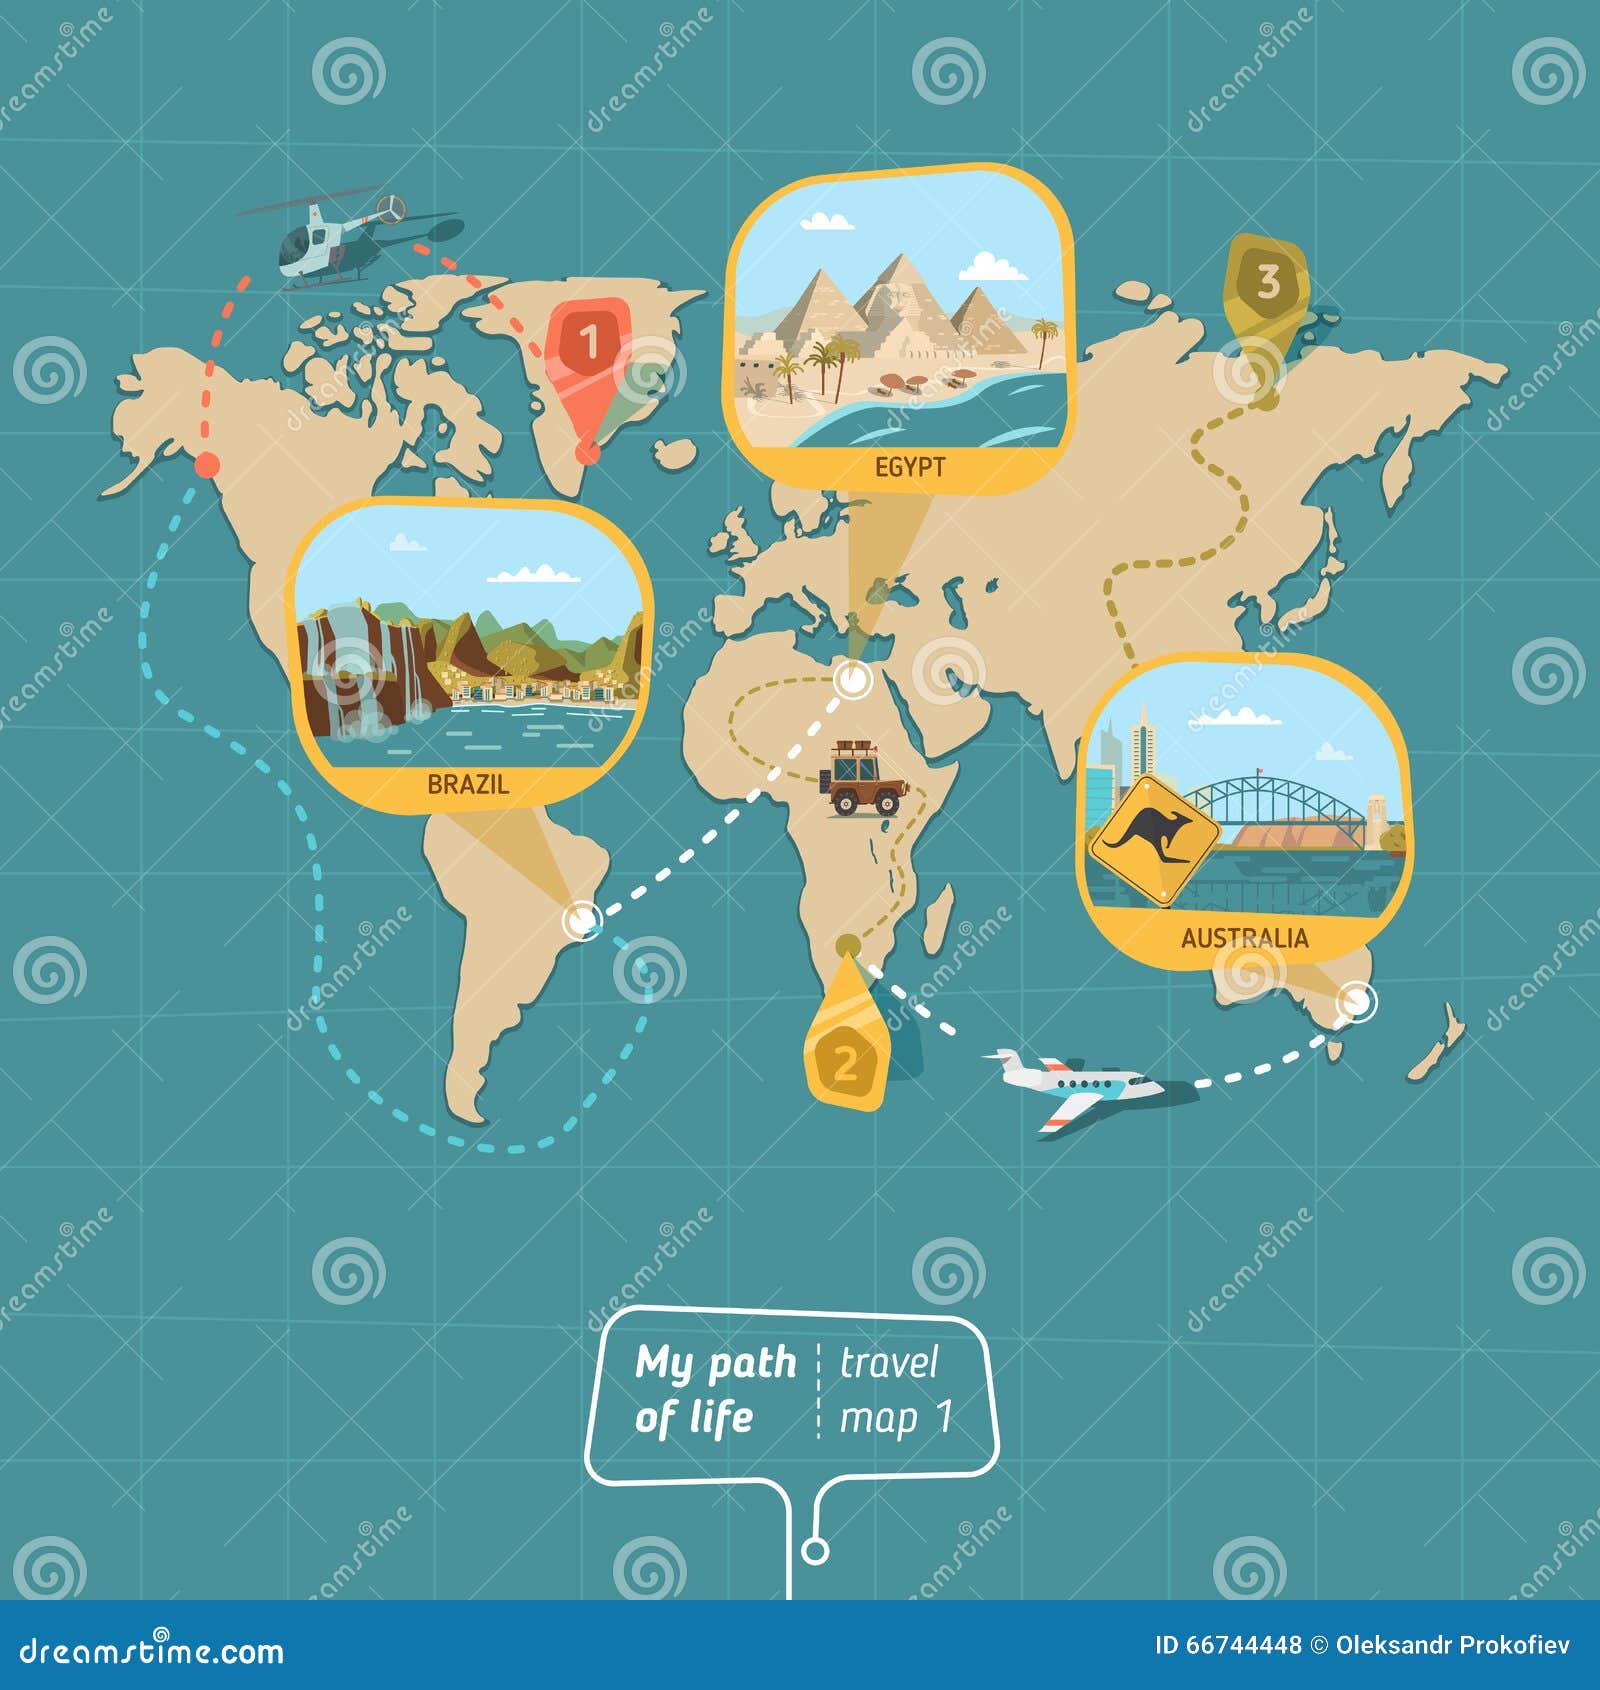 Cartoon travel map stock vector. Illustration of route - 66744448